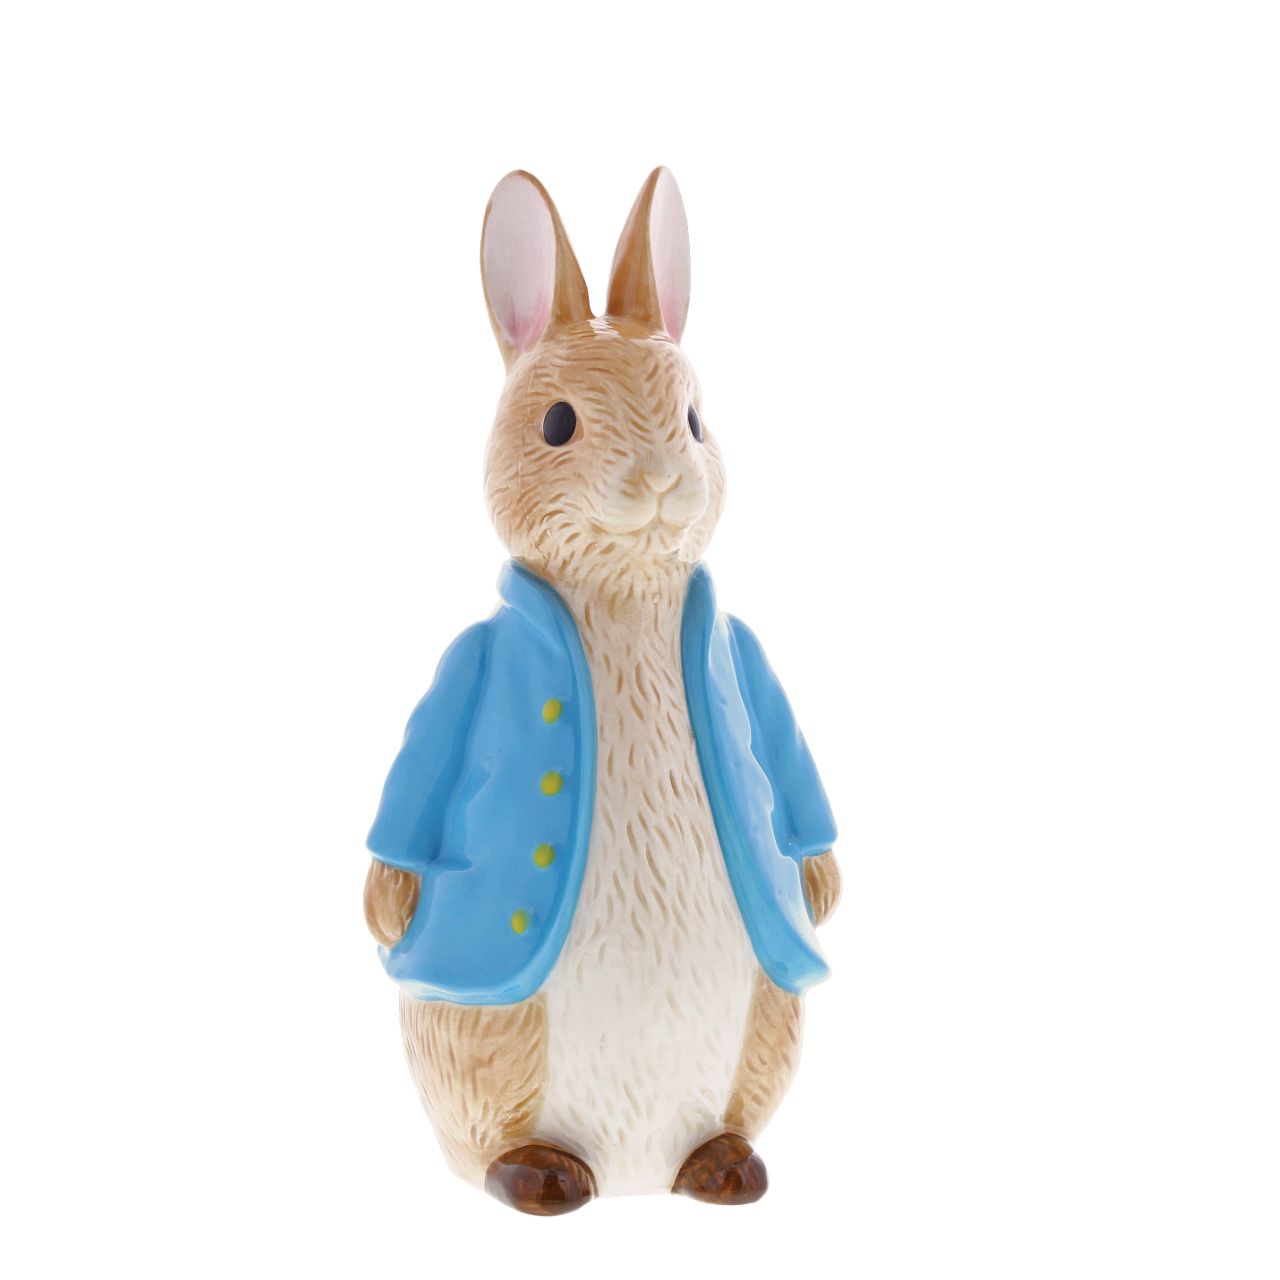 Beatrix Potter Peter Rabbit Sculpted Money Bank  This delightful and charming Peter Rabbit shaped money box would make an ideal christening gift, for collectors and Peter Rabbit fans, both young and old. The artwork is taken from the original illustrations from the Beatrix Potter stories. 